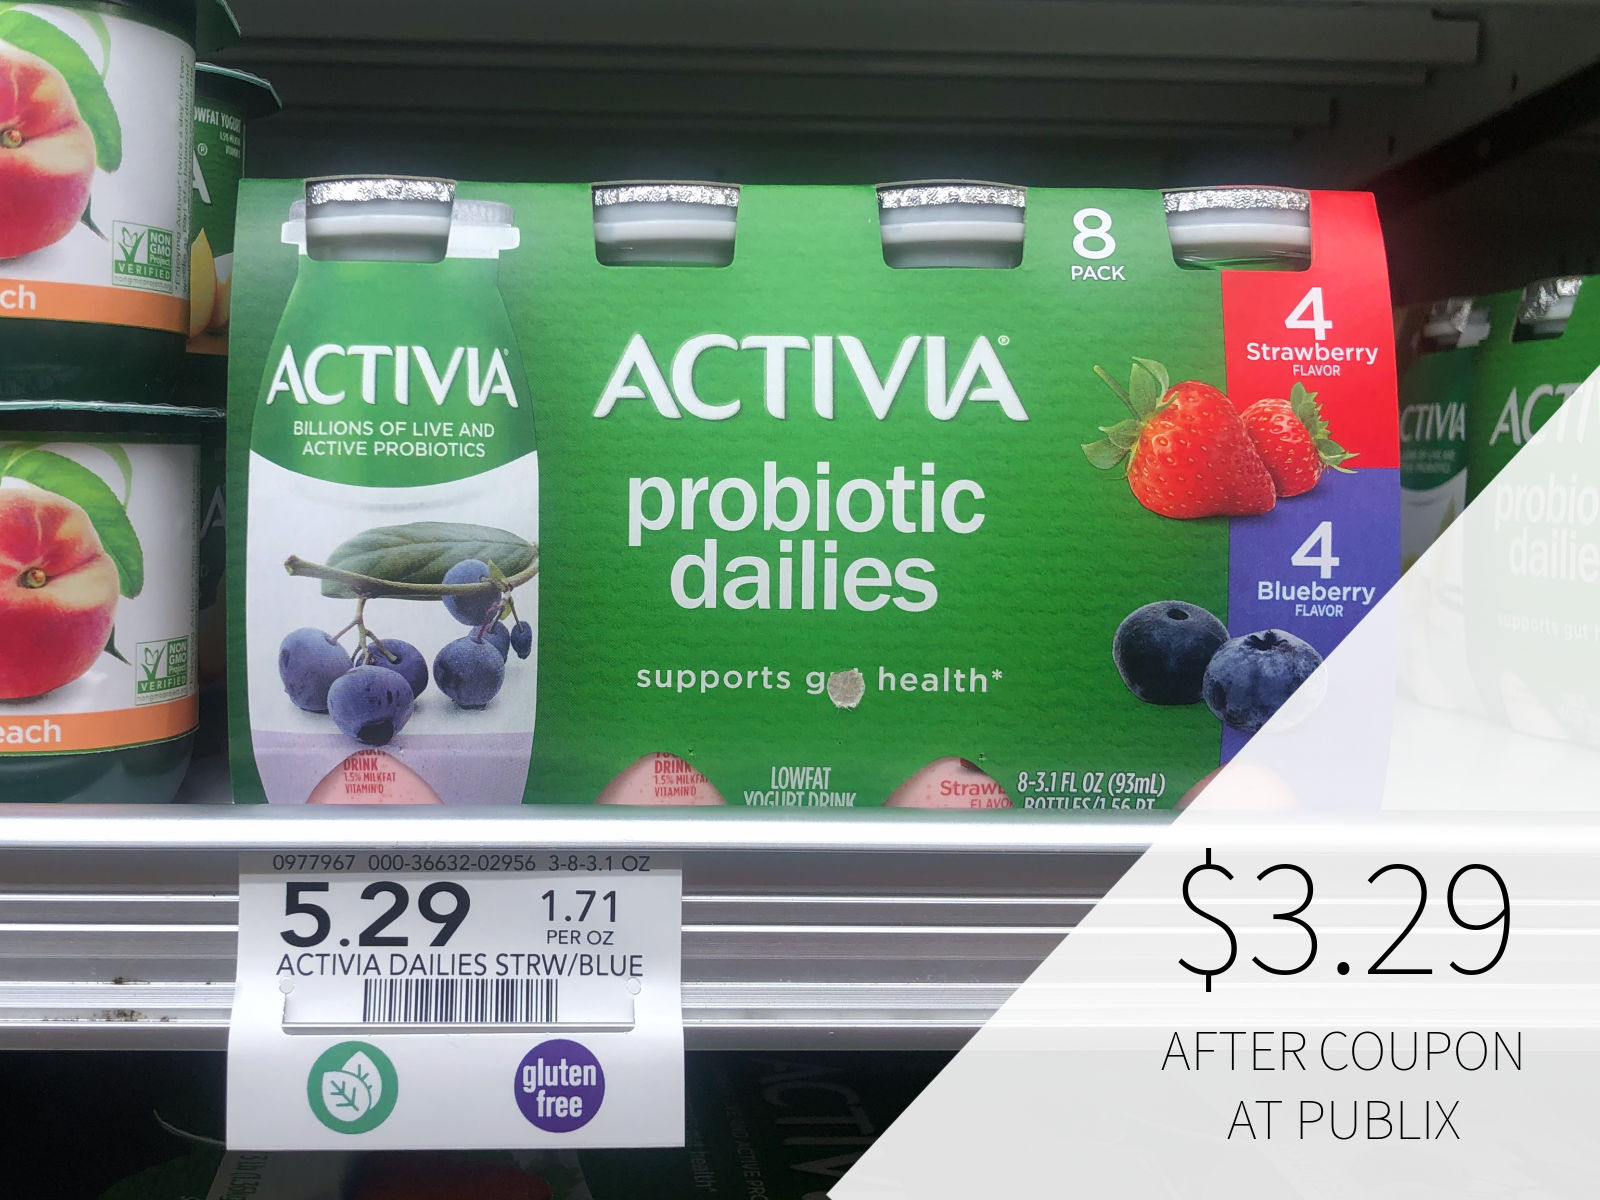 Take The Activia Gut Health Challenge - Load Your High Value Coupon & Save At Publix! on I Heart Publix